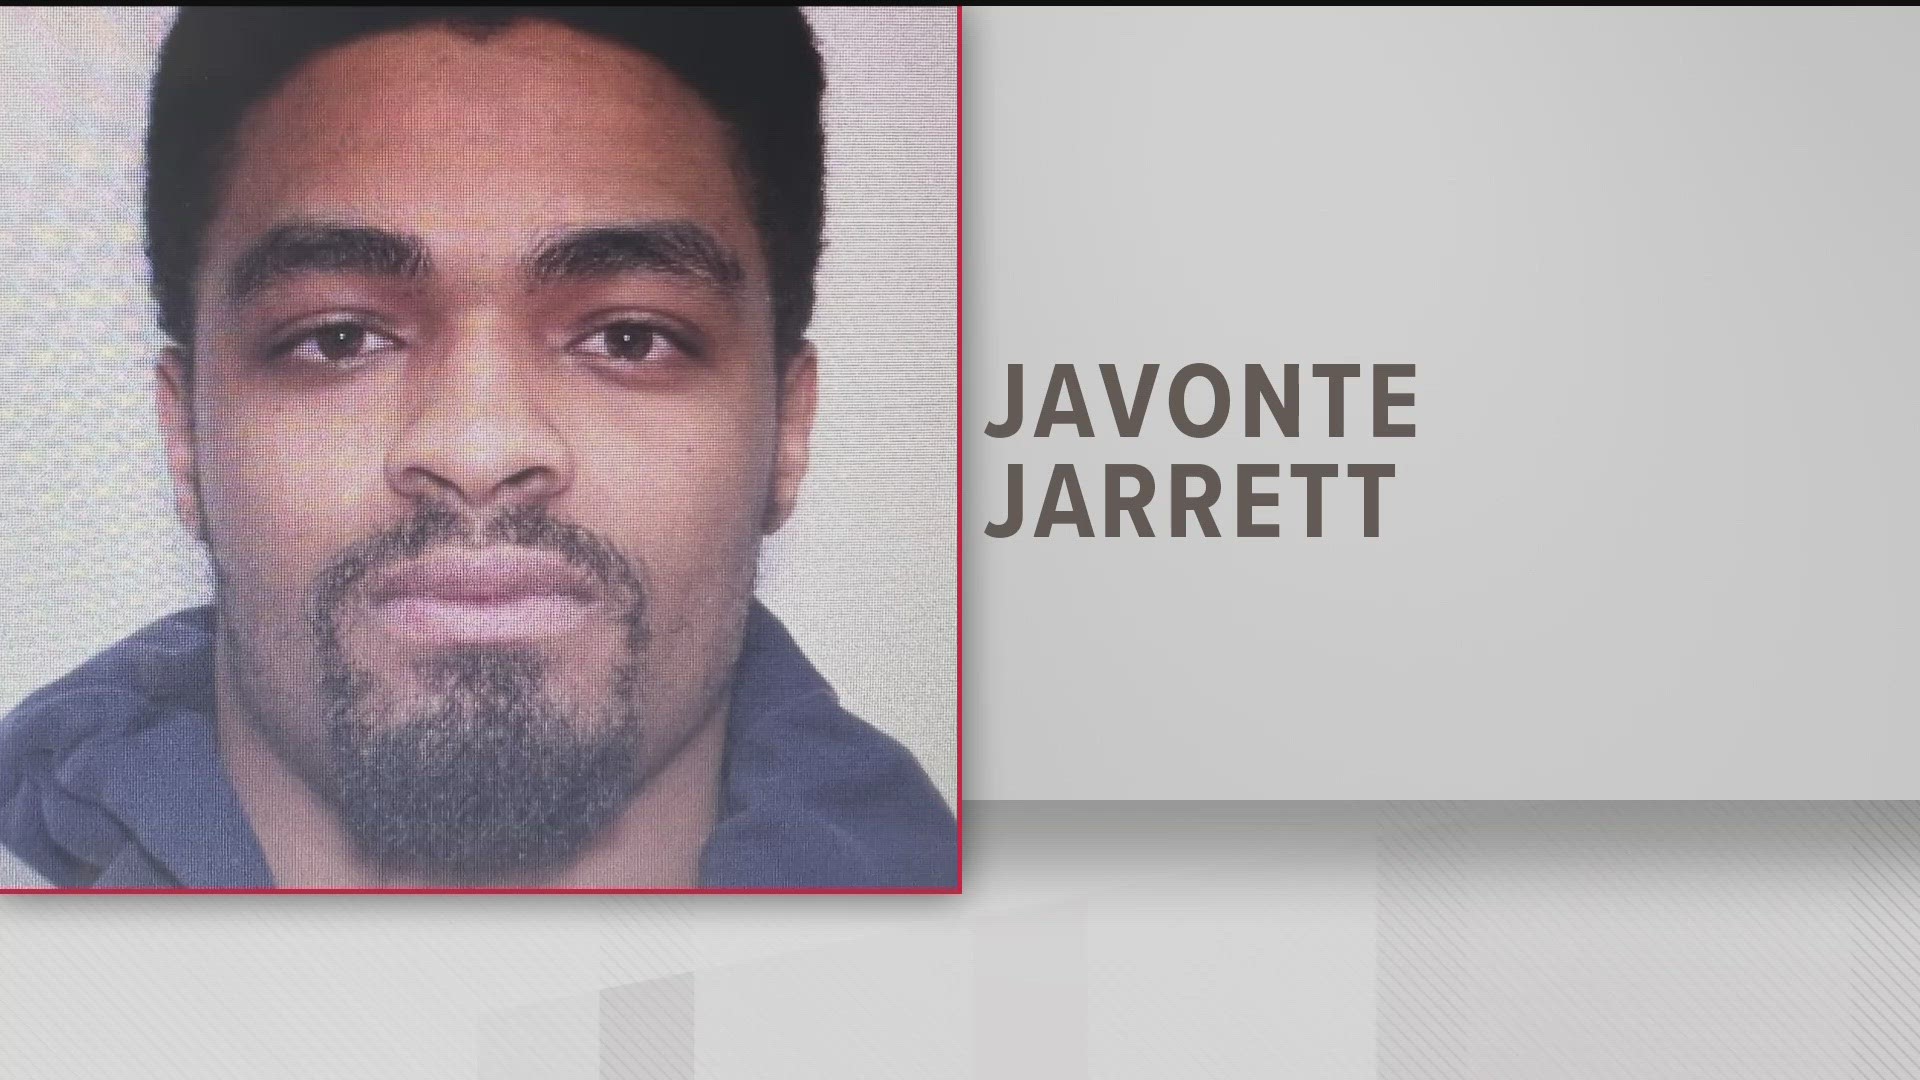 Javonte Jarrett is accused of kidnapping, rape, among other charges.